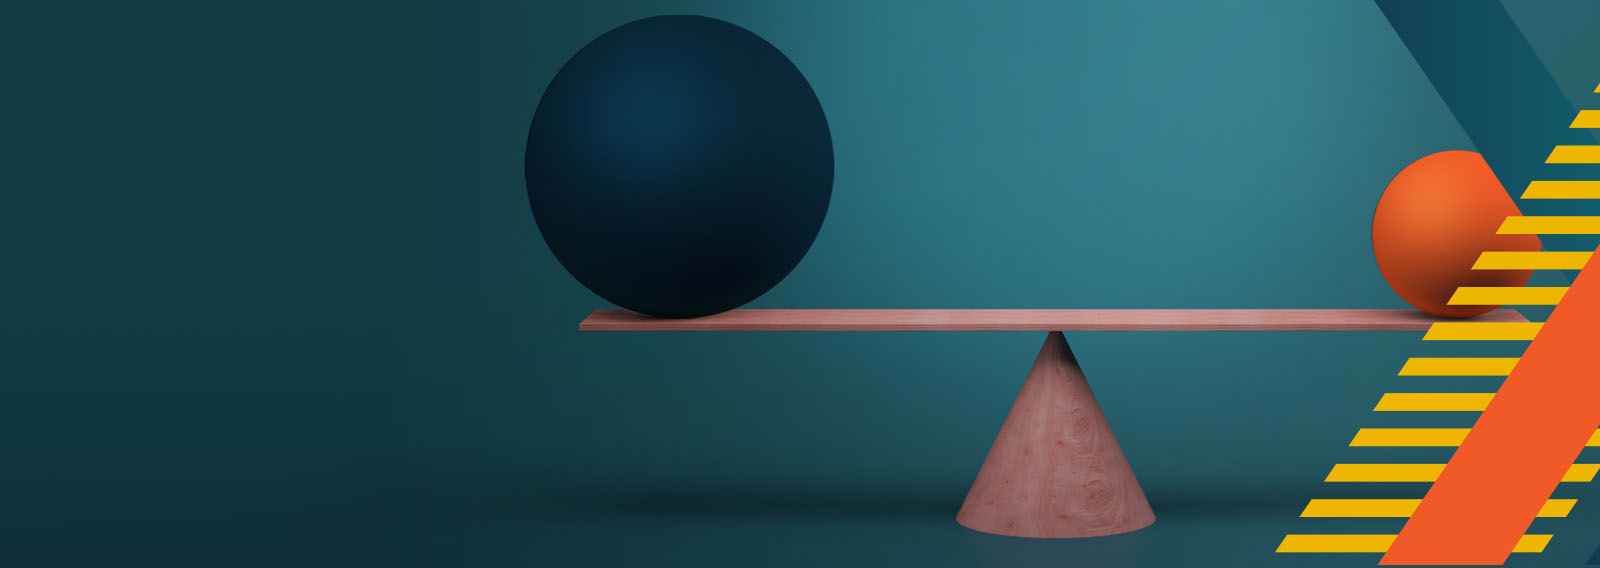 graphic of two balls balanced on a scale